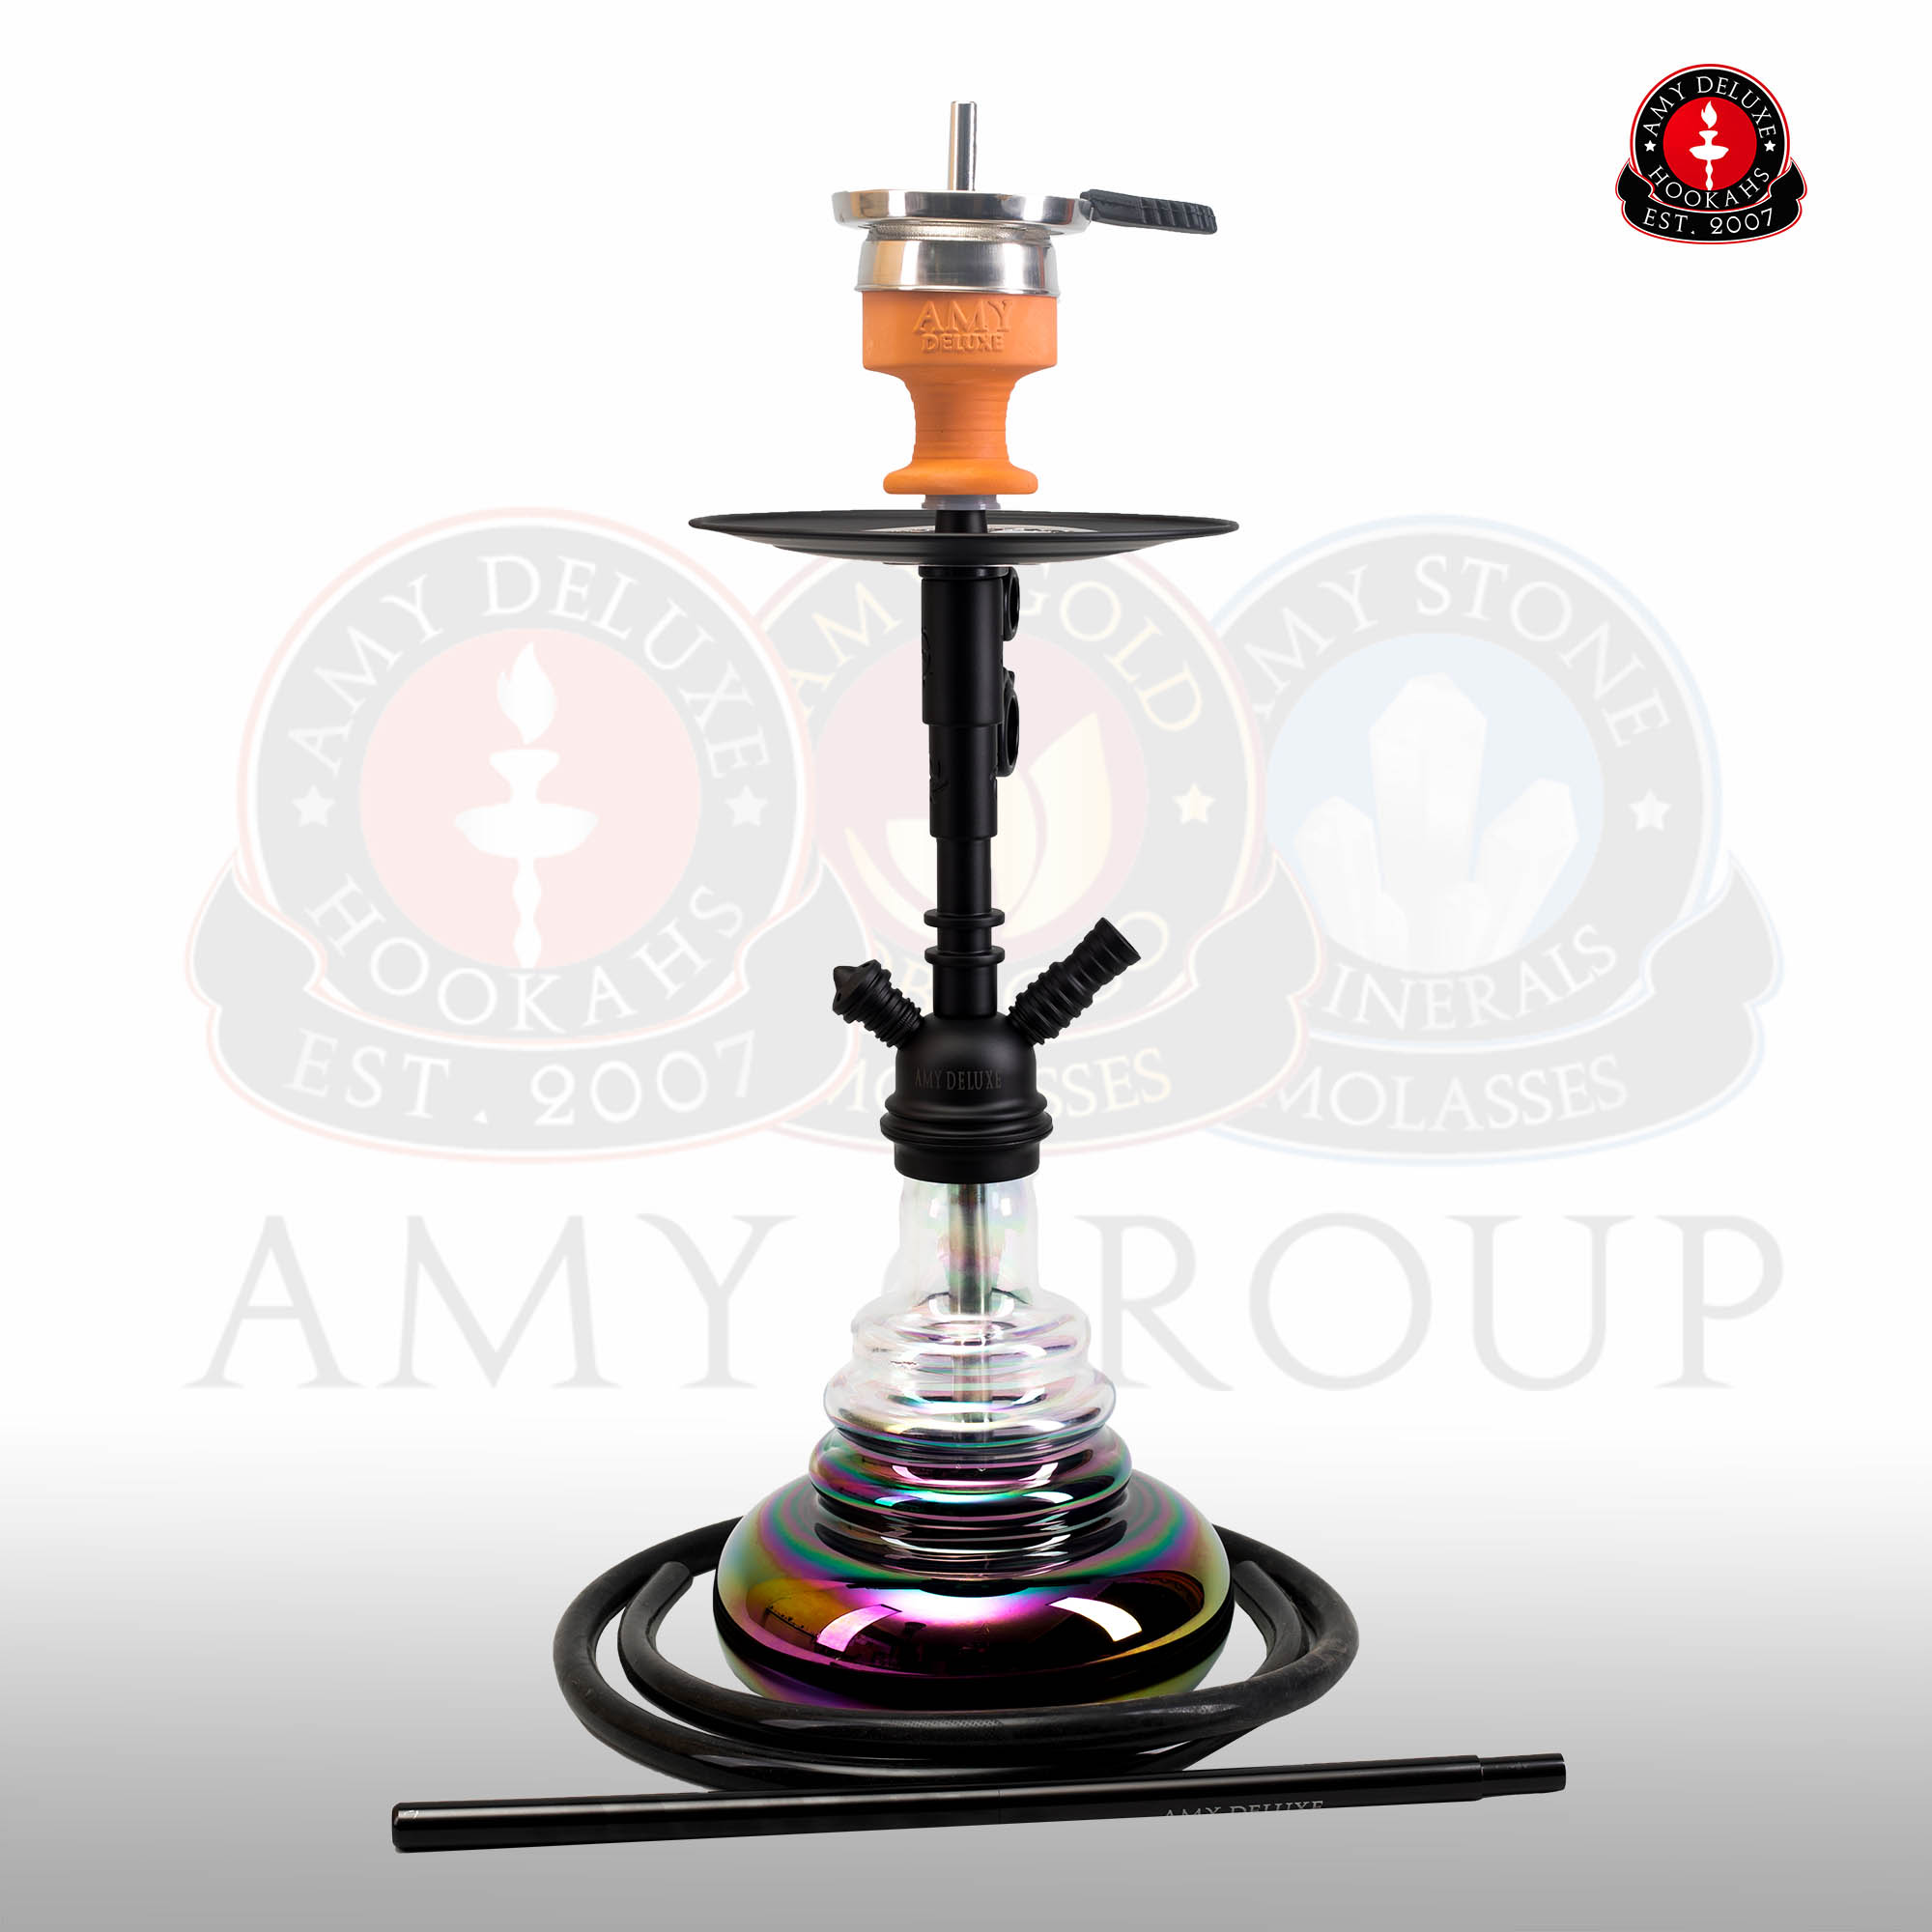 AMY Deluxe Middle cloud 060R